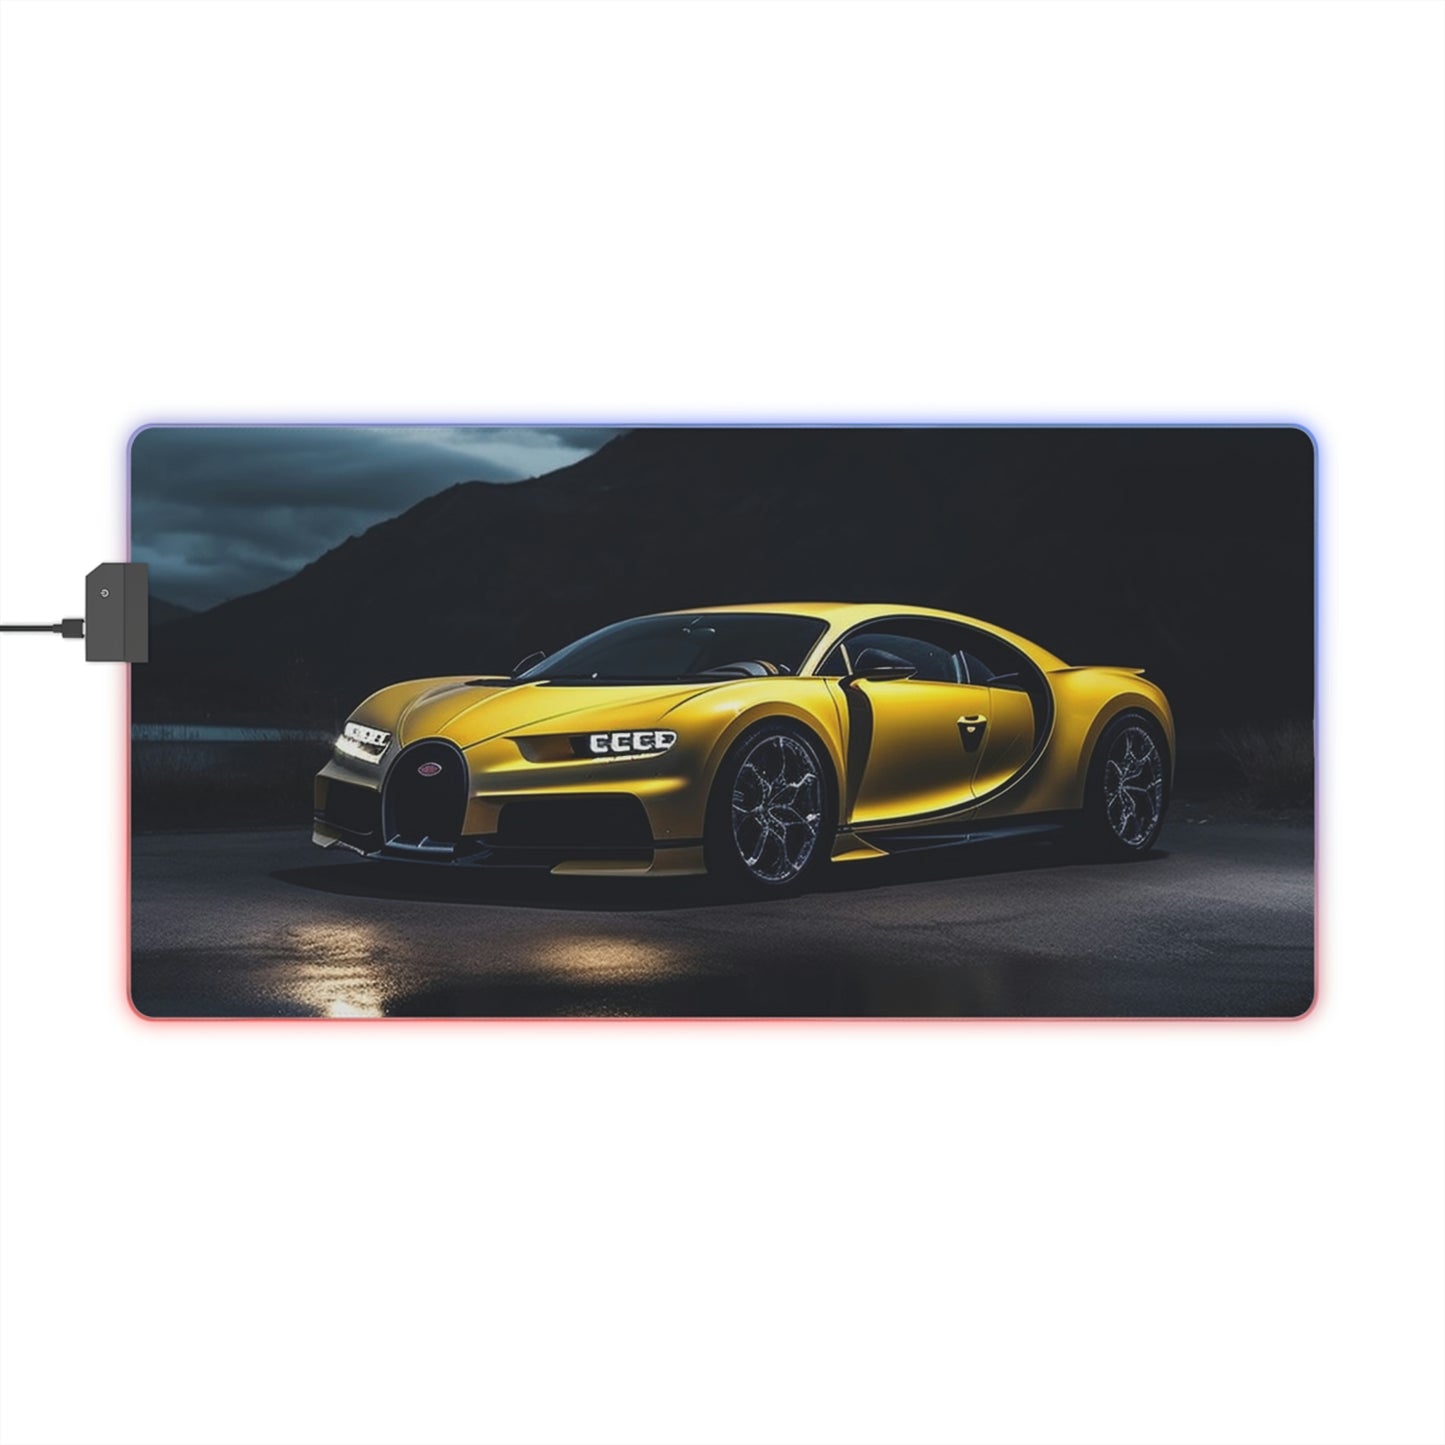 LED Gaming Mouse Pad Bugatti Real Look 4